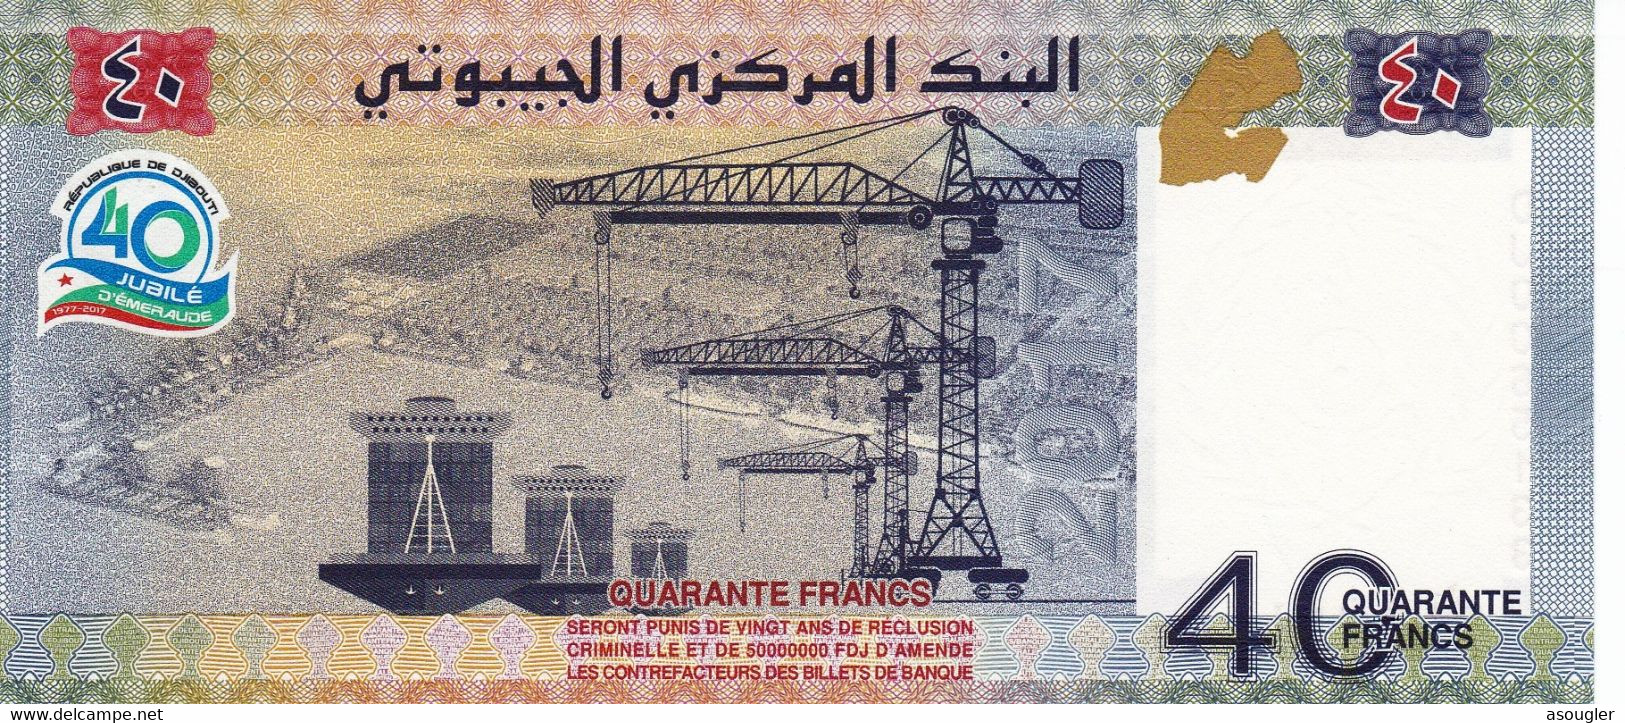 Djibouti 40 Francs 2017 UNC P-46 Commemorative Issue 40th Anniversary Of Independence. Free S/H Via Regular Air Mail. - Dschibuti